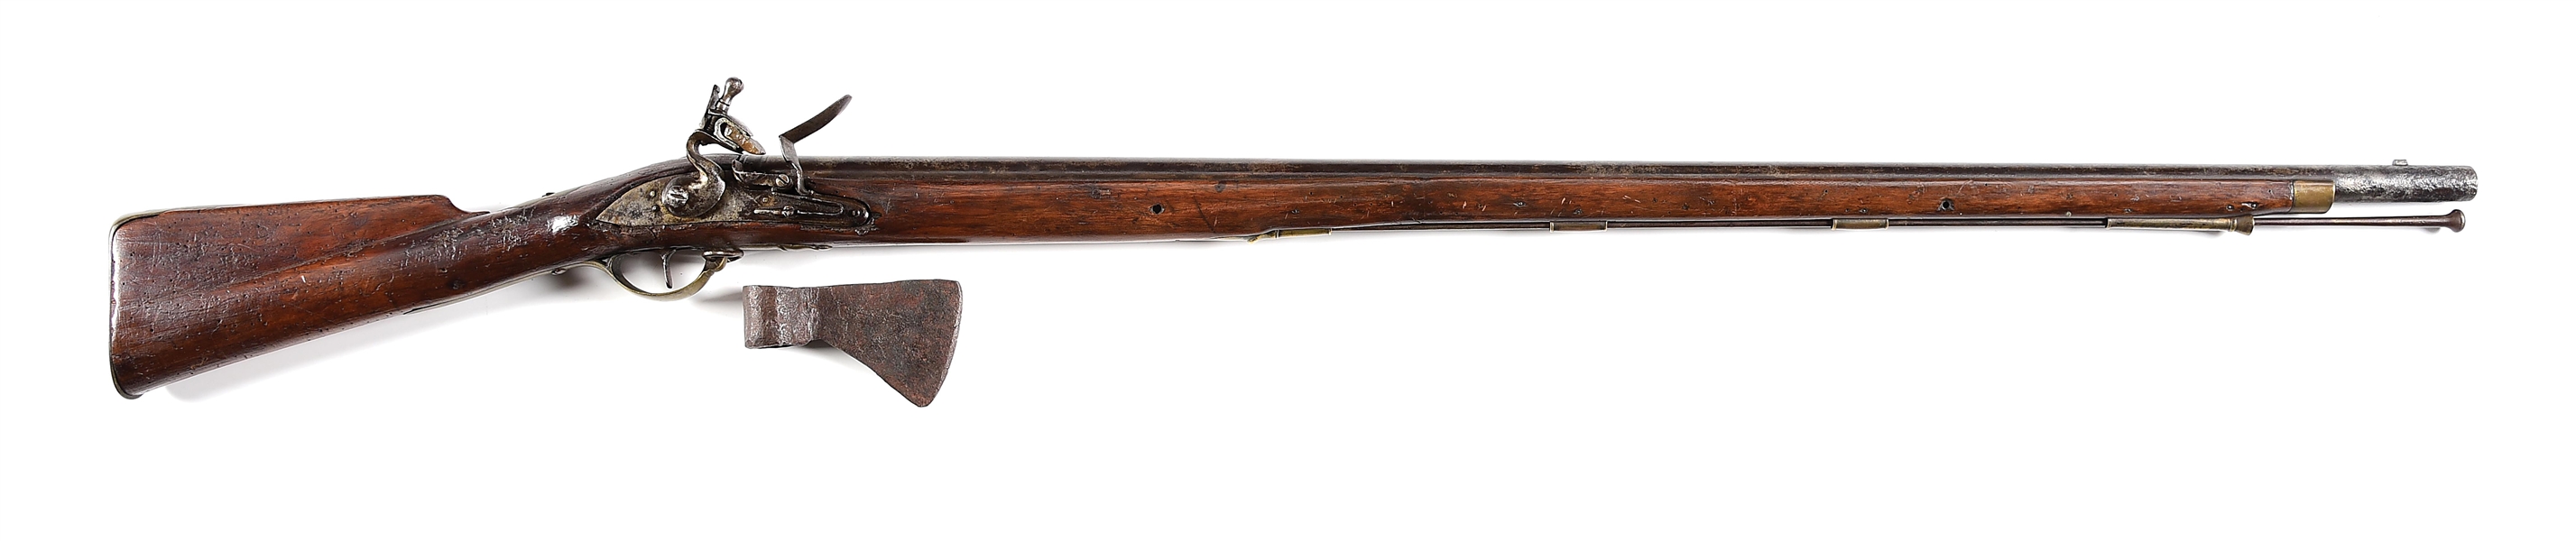 (A) MARYLAND COMMITTEE OF SAFETY TYPE MUSKET AND BELT AX HEAD ATTRIBUTED TO THOMAS EWING.